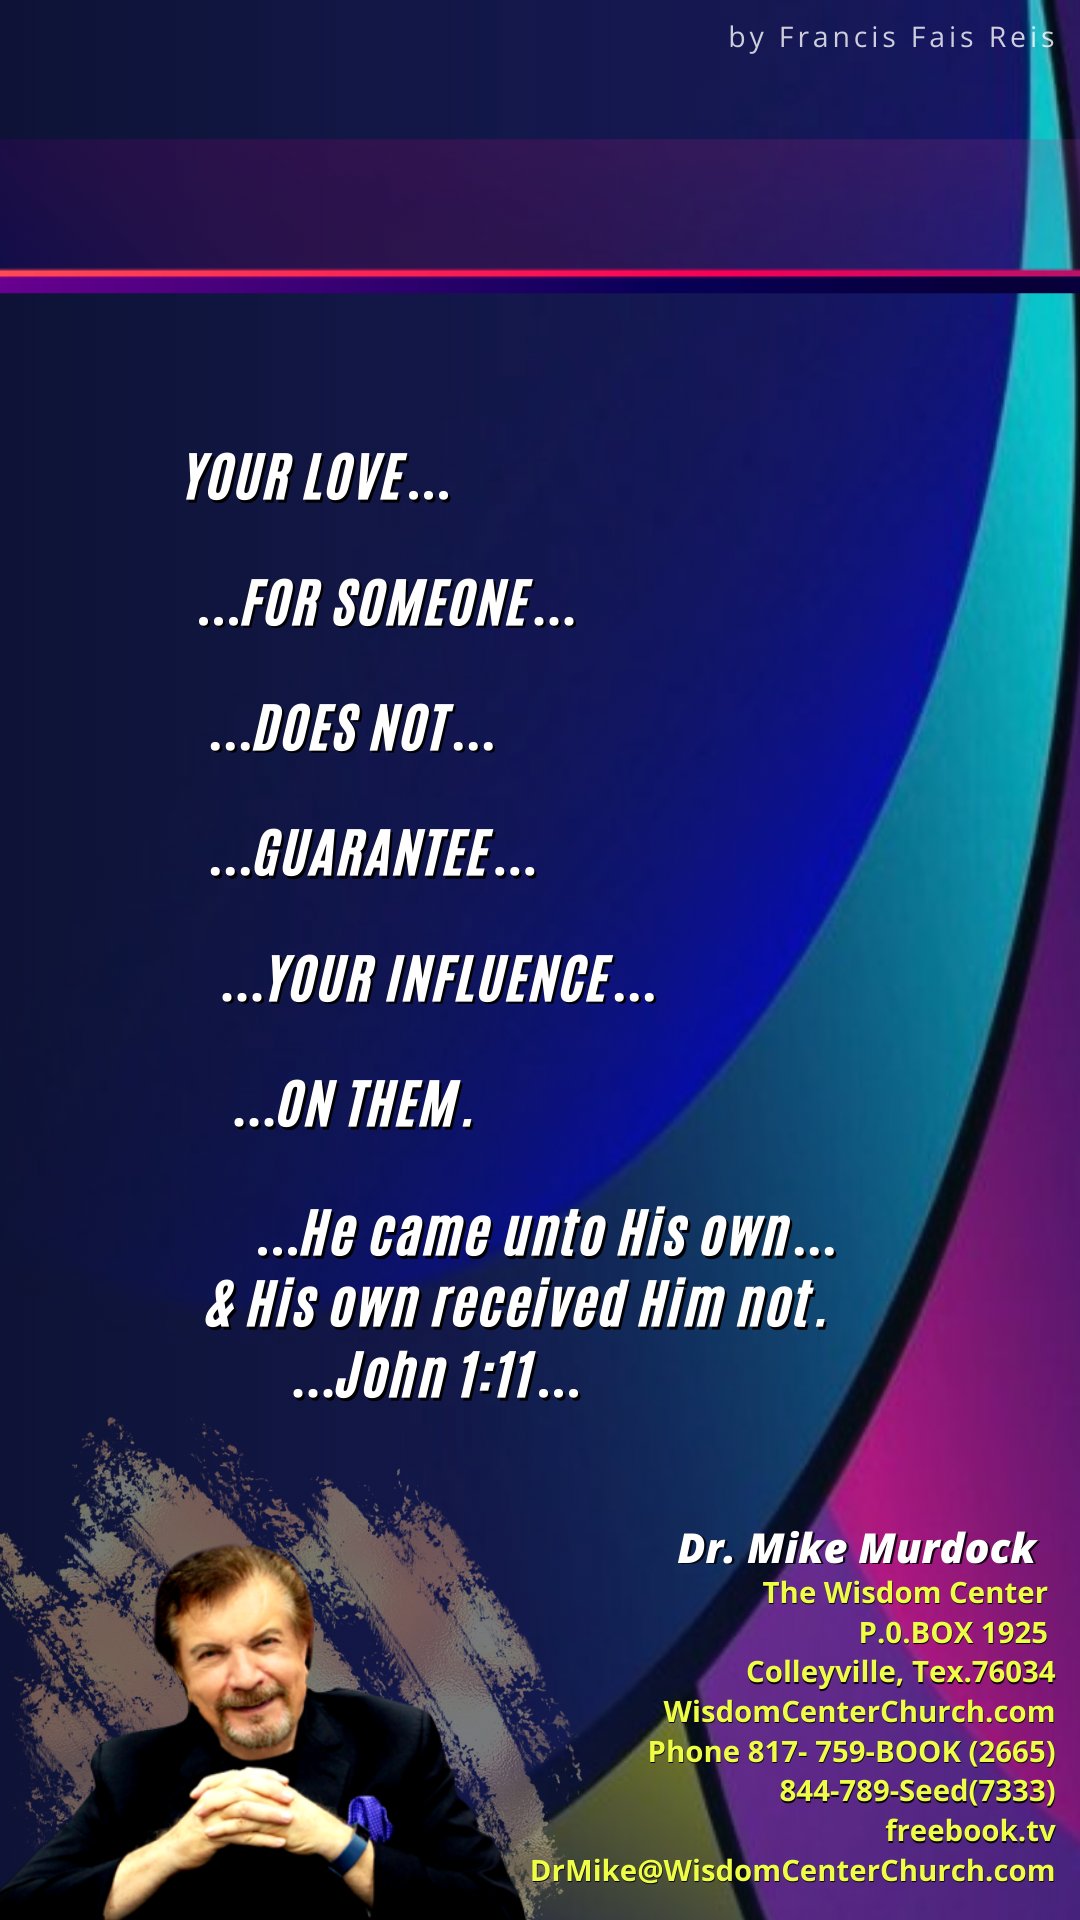 by Francis Fais Re YOUR LOVE FOR SOMEONE . DOES NOT . GUARANTEE _ YOUR INFLUENCE . ON THEM  He came unto His own_ } His own received Him not. John 1:11. Dr: Mike Murdock The Wisdom Center P.O.BOX 1925 Colleyville, Tex 76034 WisdomCenterChurch:com Phone 817-759-BOOK (2665) 844-789-Seed(7333) freebooktv DrMike@WisdomCenterChurch com